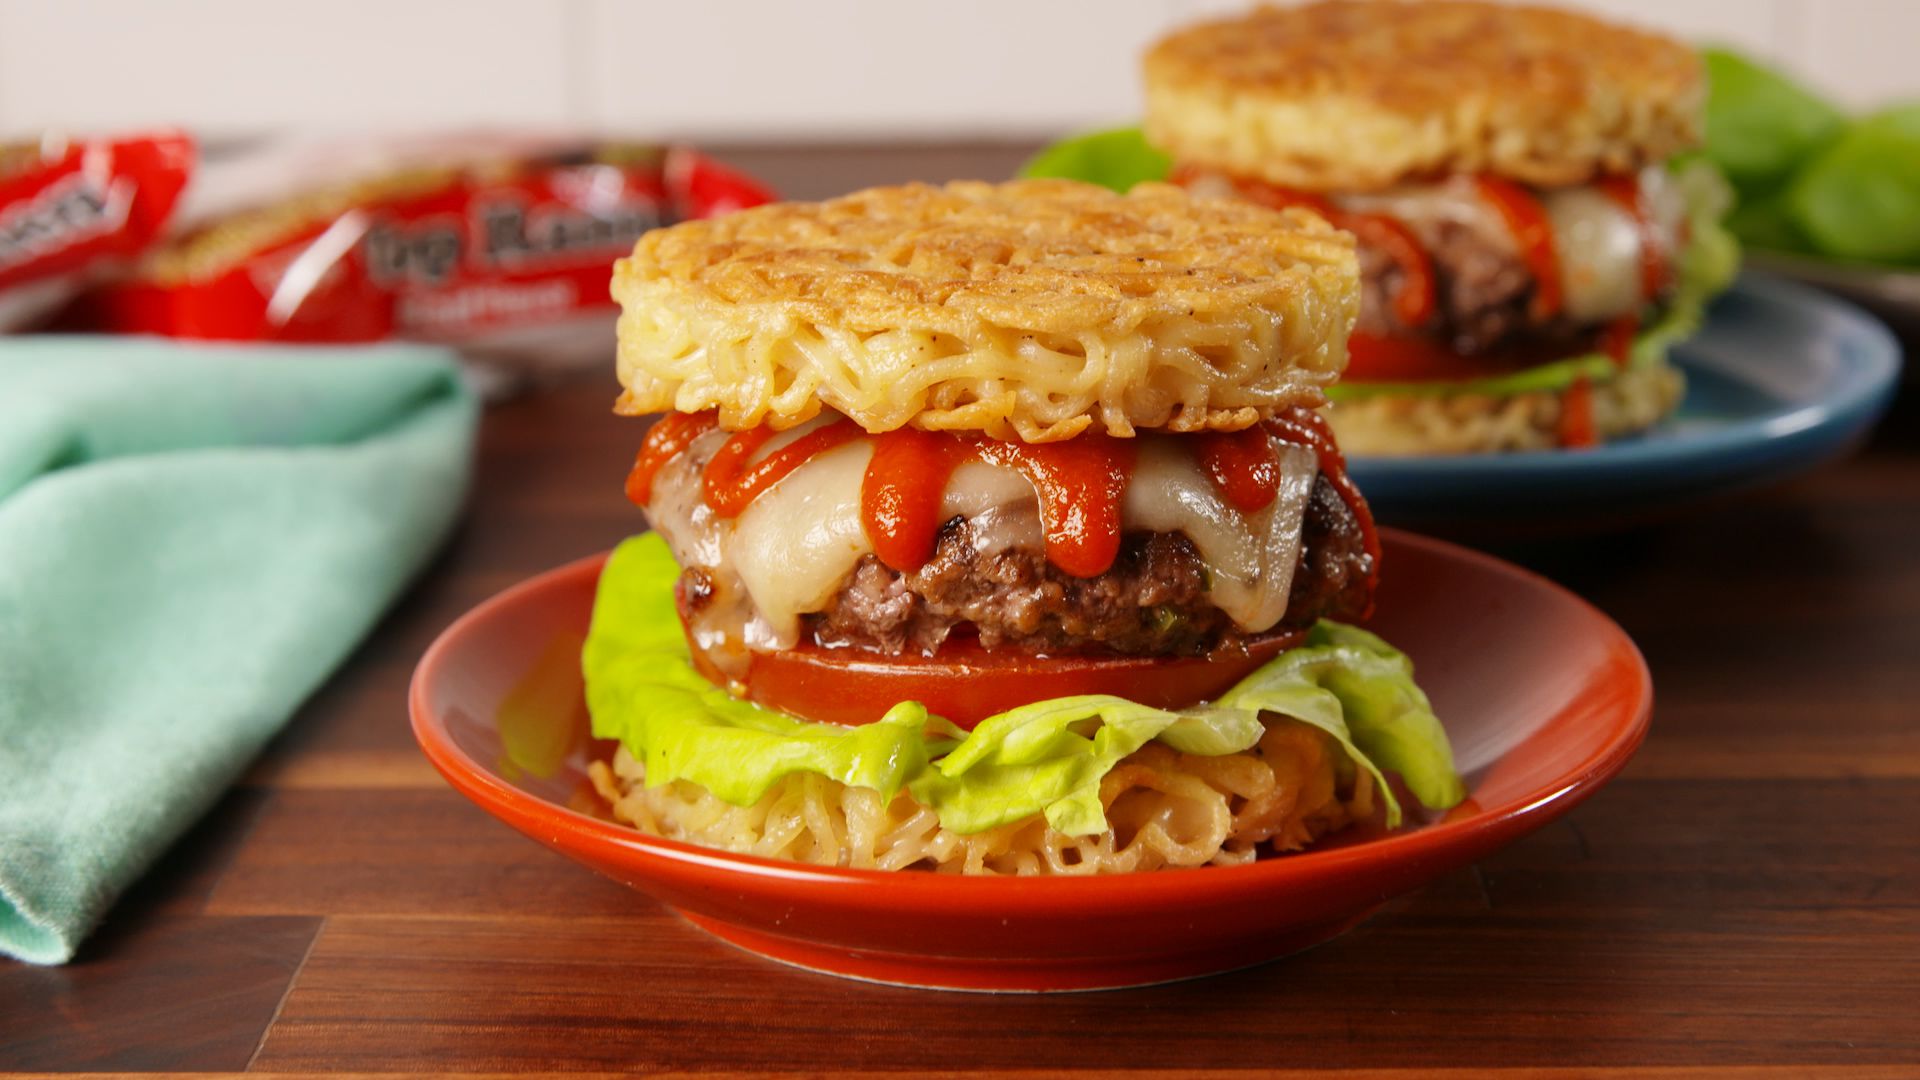 Say “Yum” Or “Yuck” to These Trendy Foods to Find Out What People Hate Most About You Ramen burger